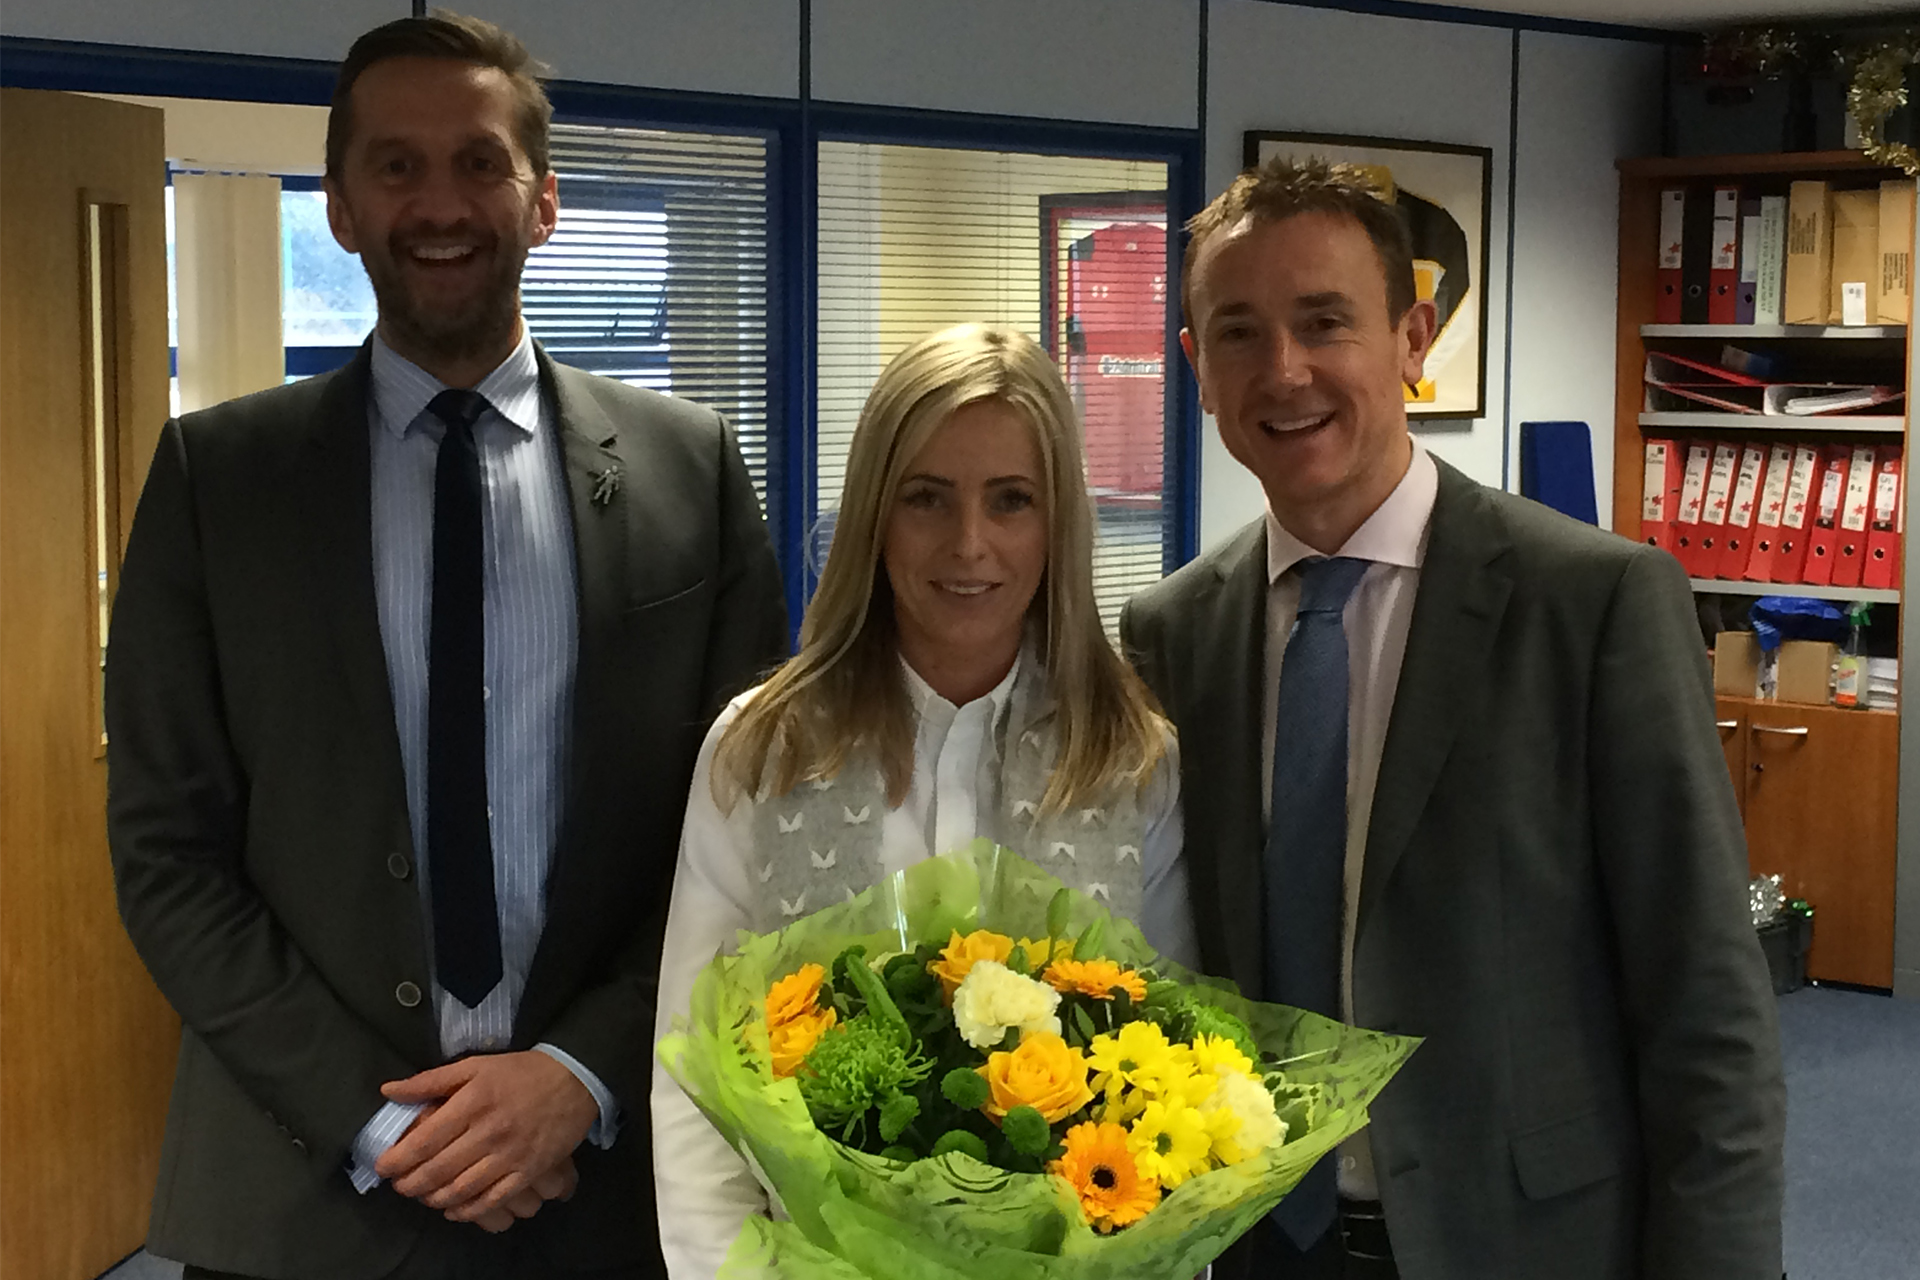 Simon Trippett (Director) and Steve Jones (Partner) presenting Victoria Anderson (Social Media Marketing Executive) with flowers on her 10 year anniversary at The Property Centre